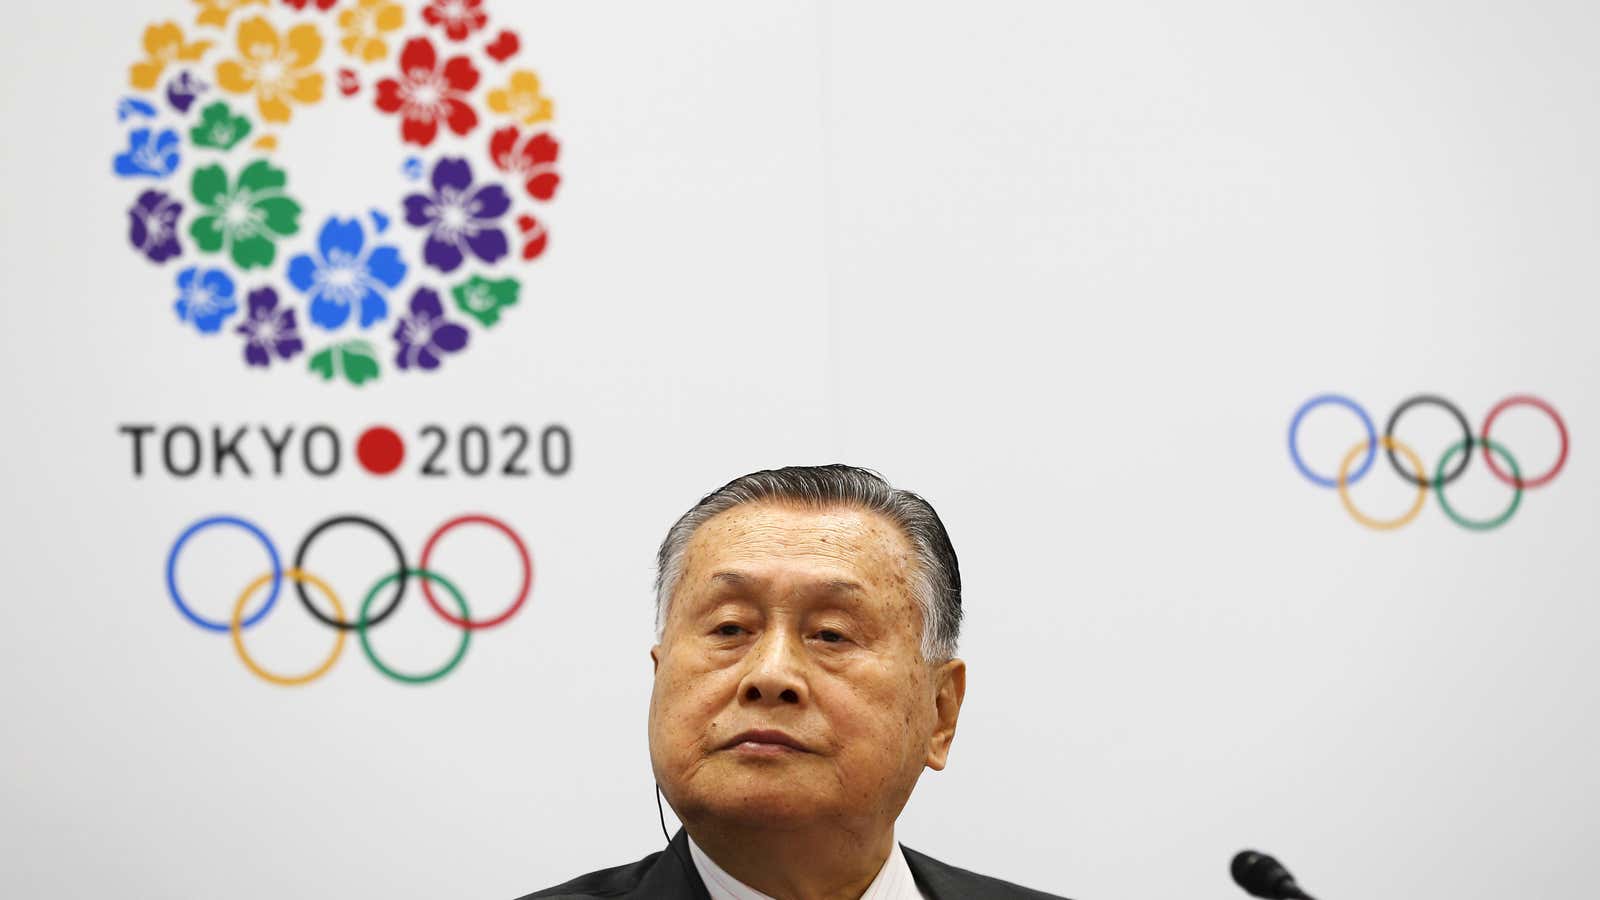 Former prime minister Yoshiro Mori is the president of the Tokyo 2020 Organizing Committee.